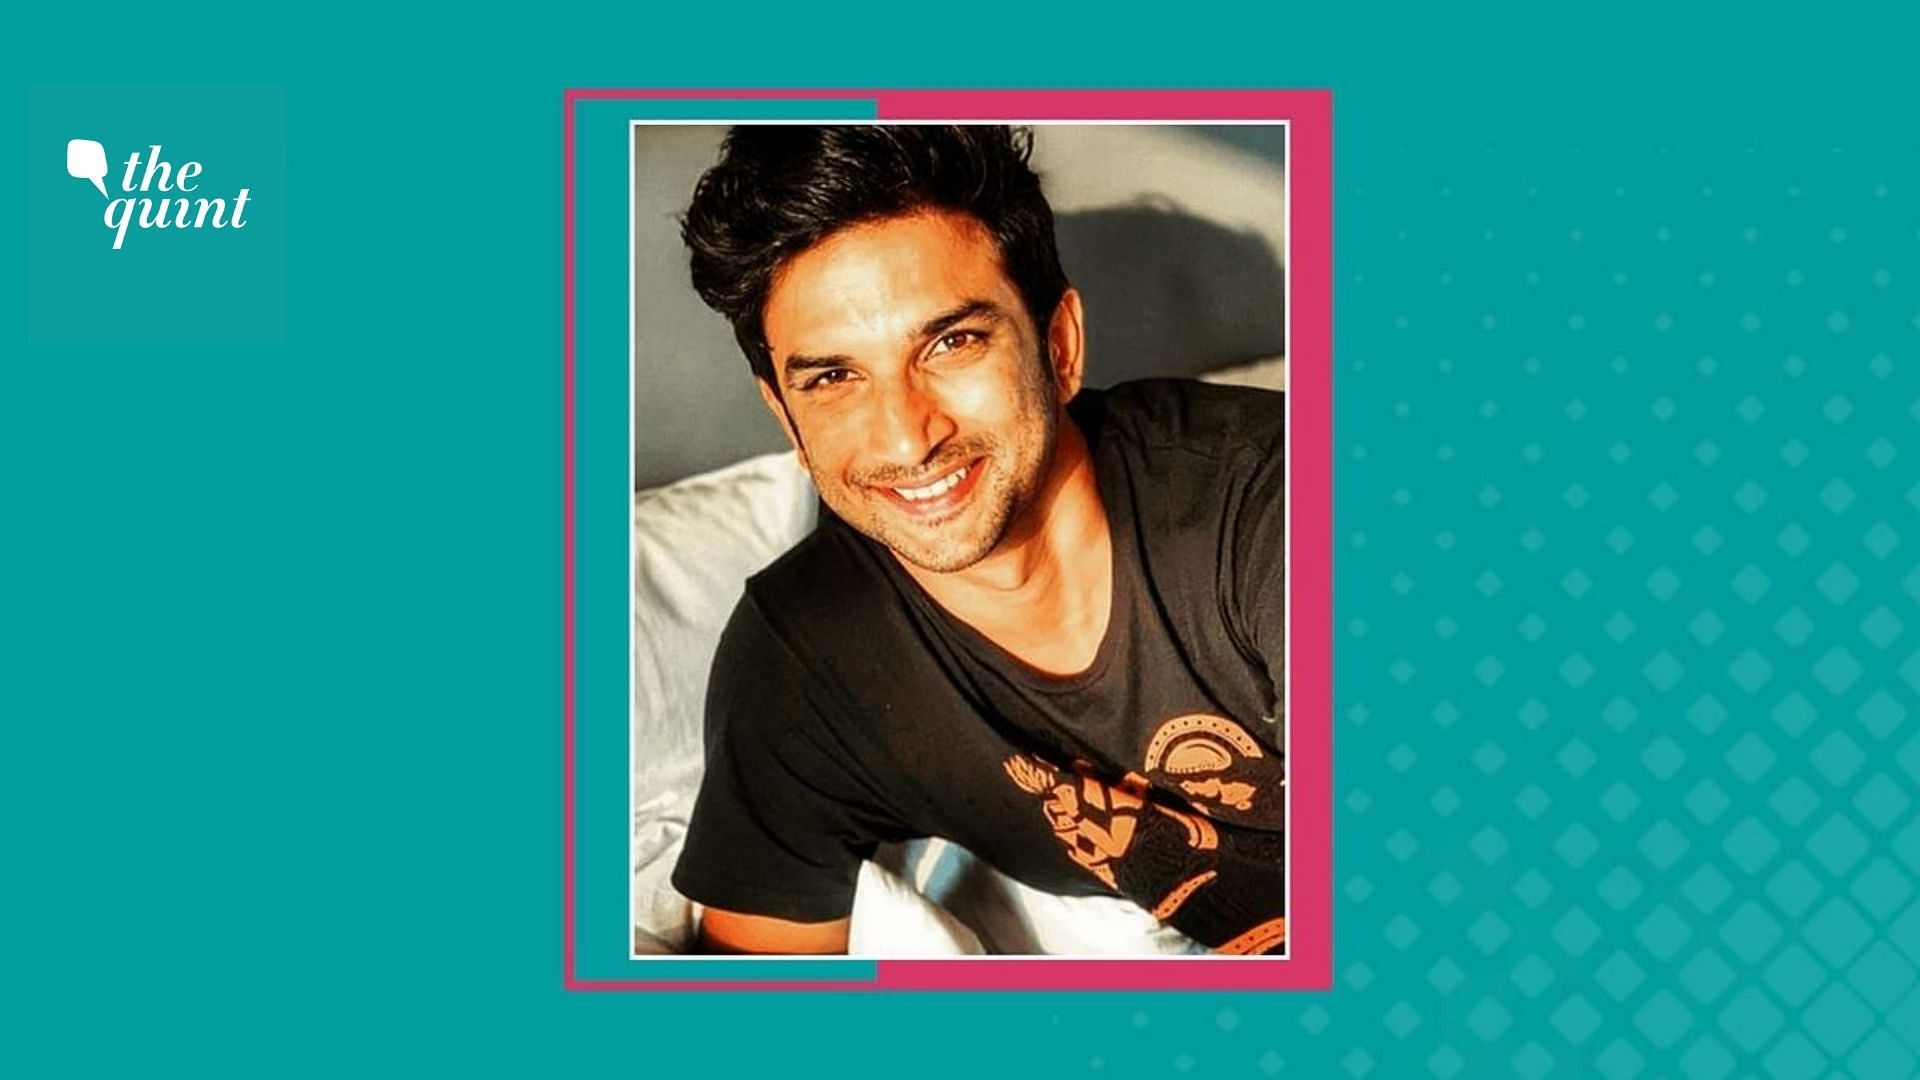 On Saturday, 1 August, the late Bollywood actor Sushant Singh Rajput’s therapist Susan Walker publically broke confidentially to reveal details about the actor’s mental health condition. 